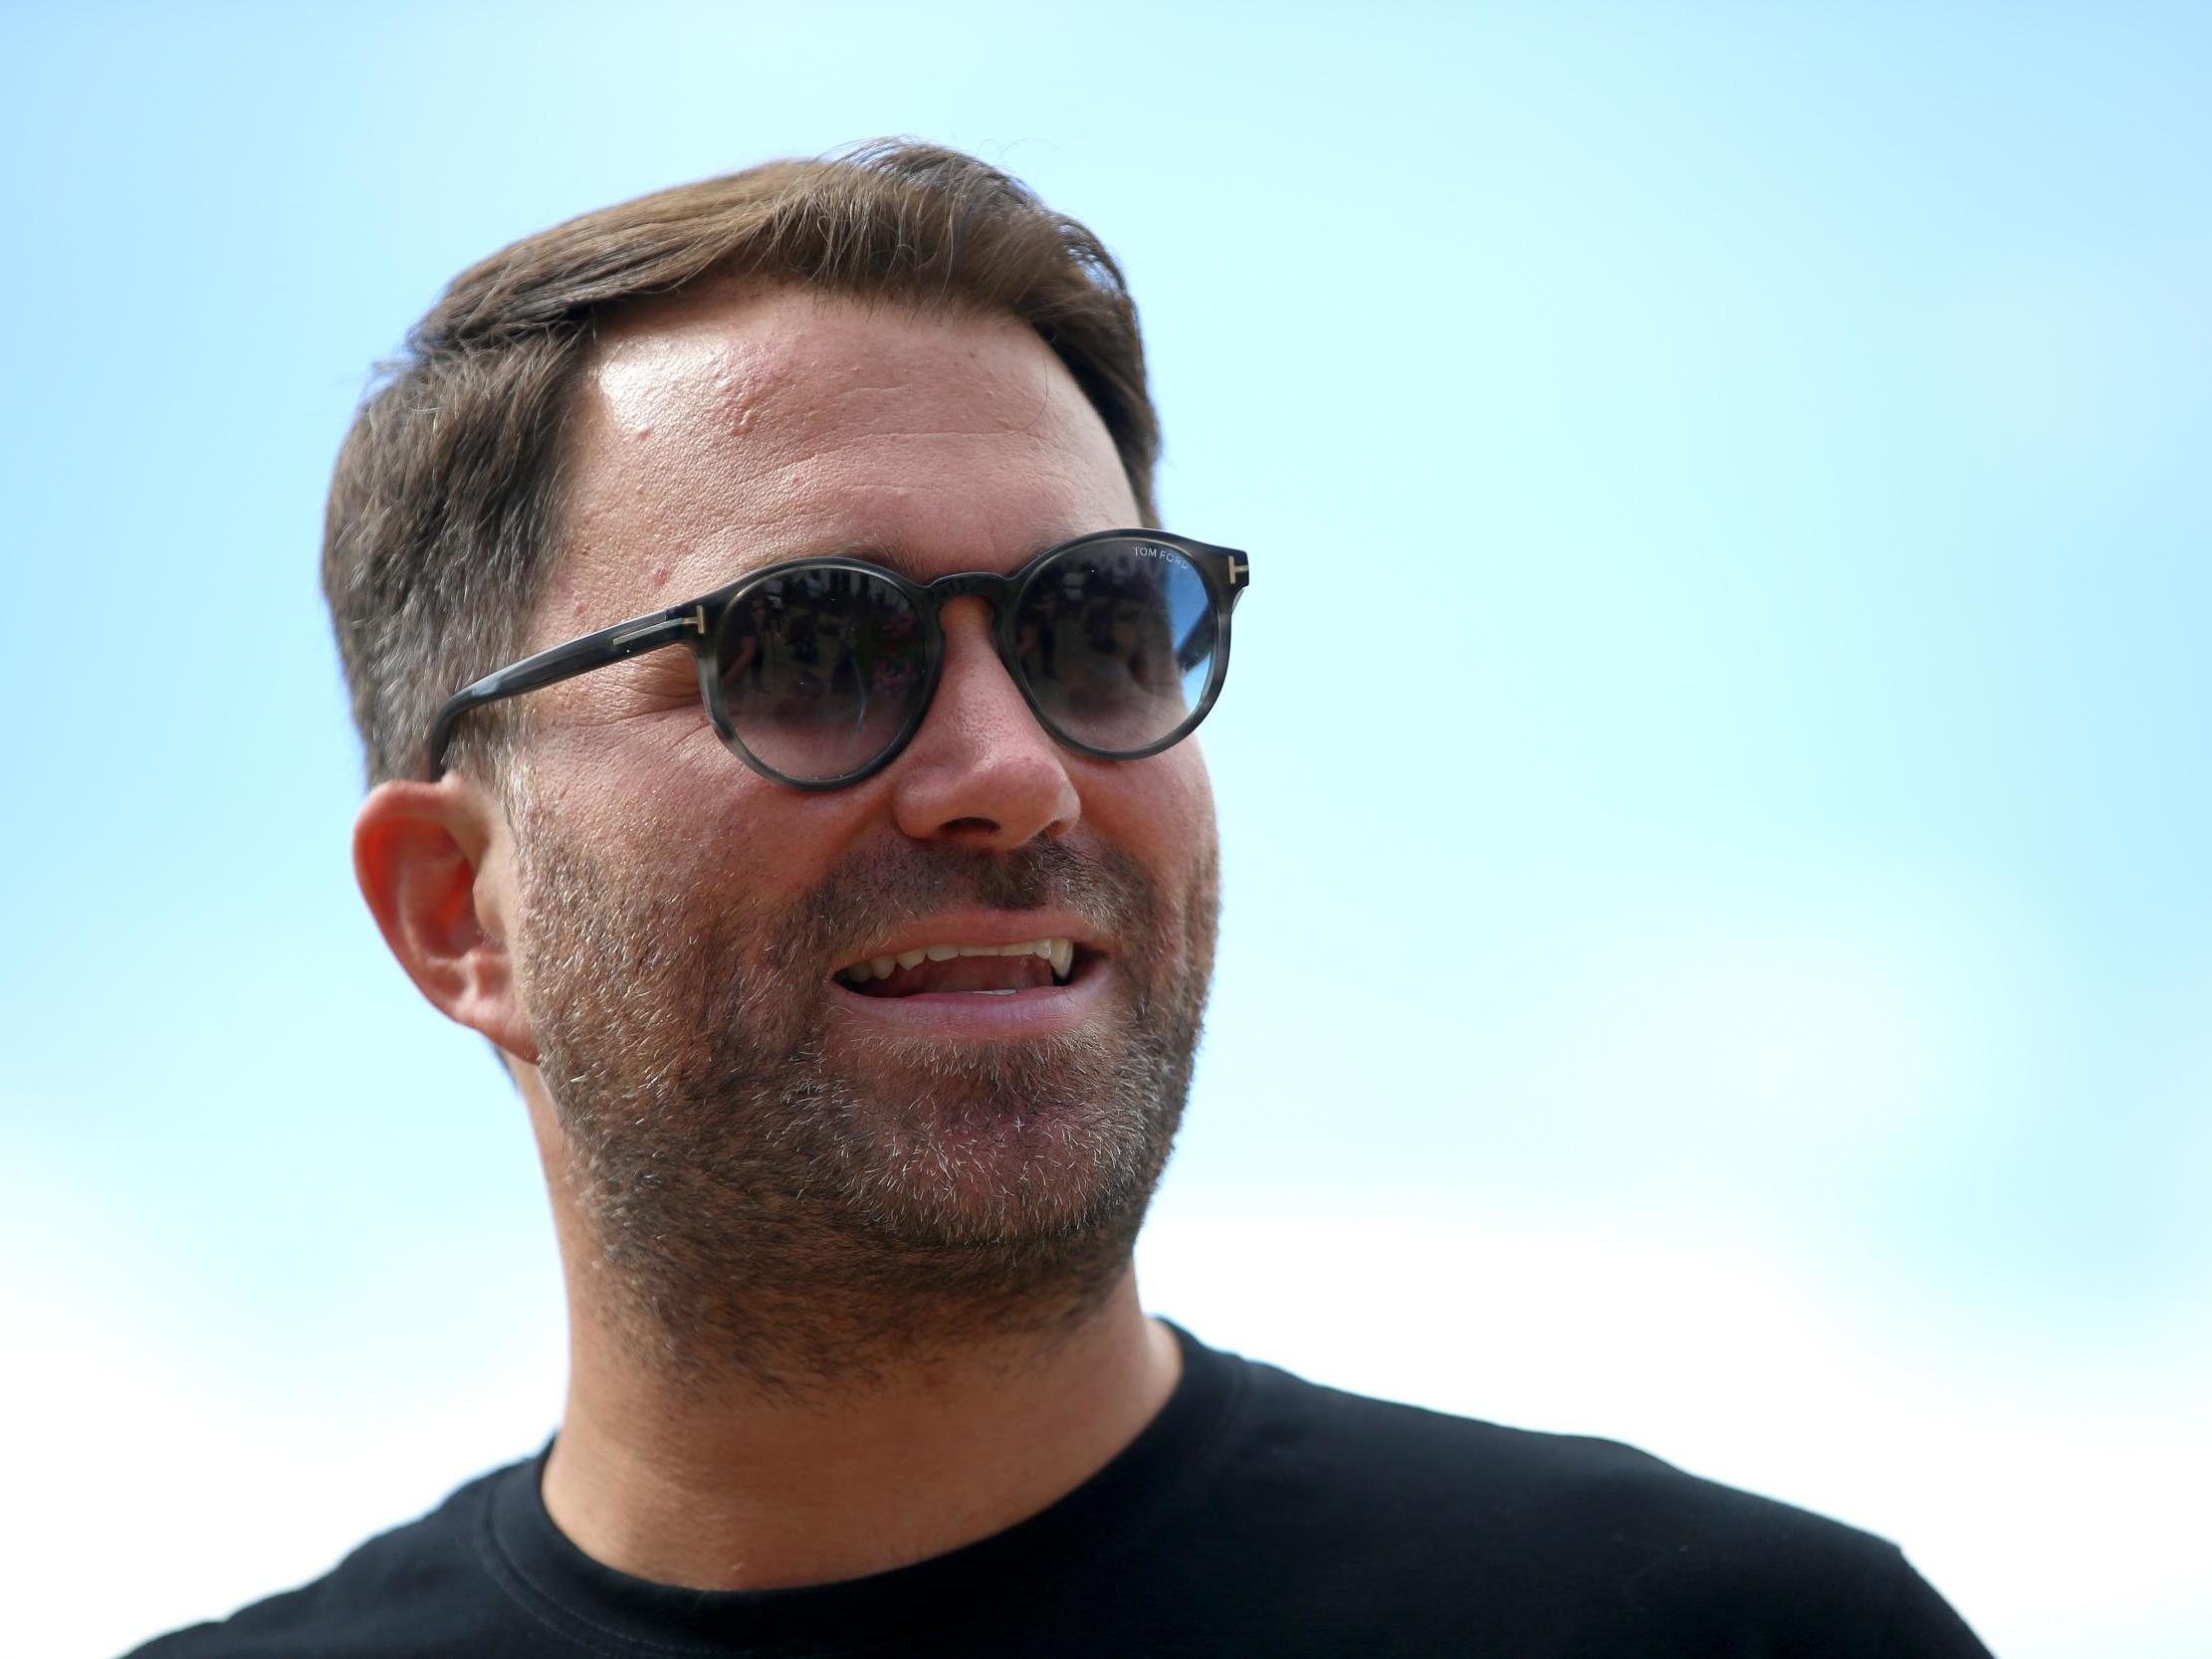 Eddie Hearn is the promoter of Anthony Joshua